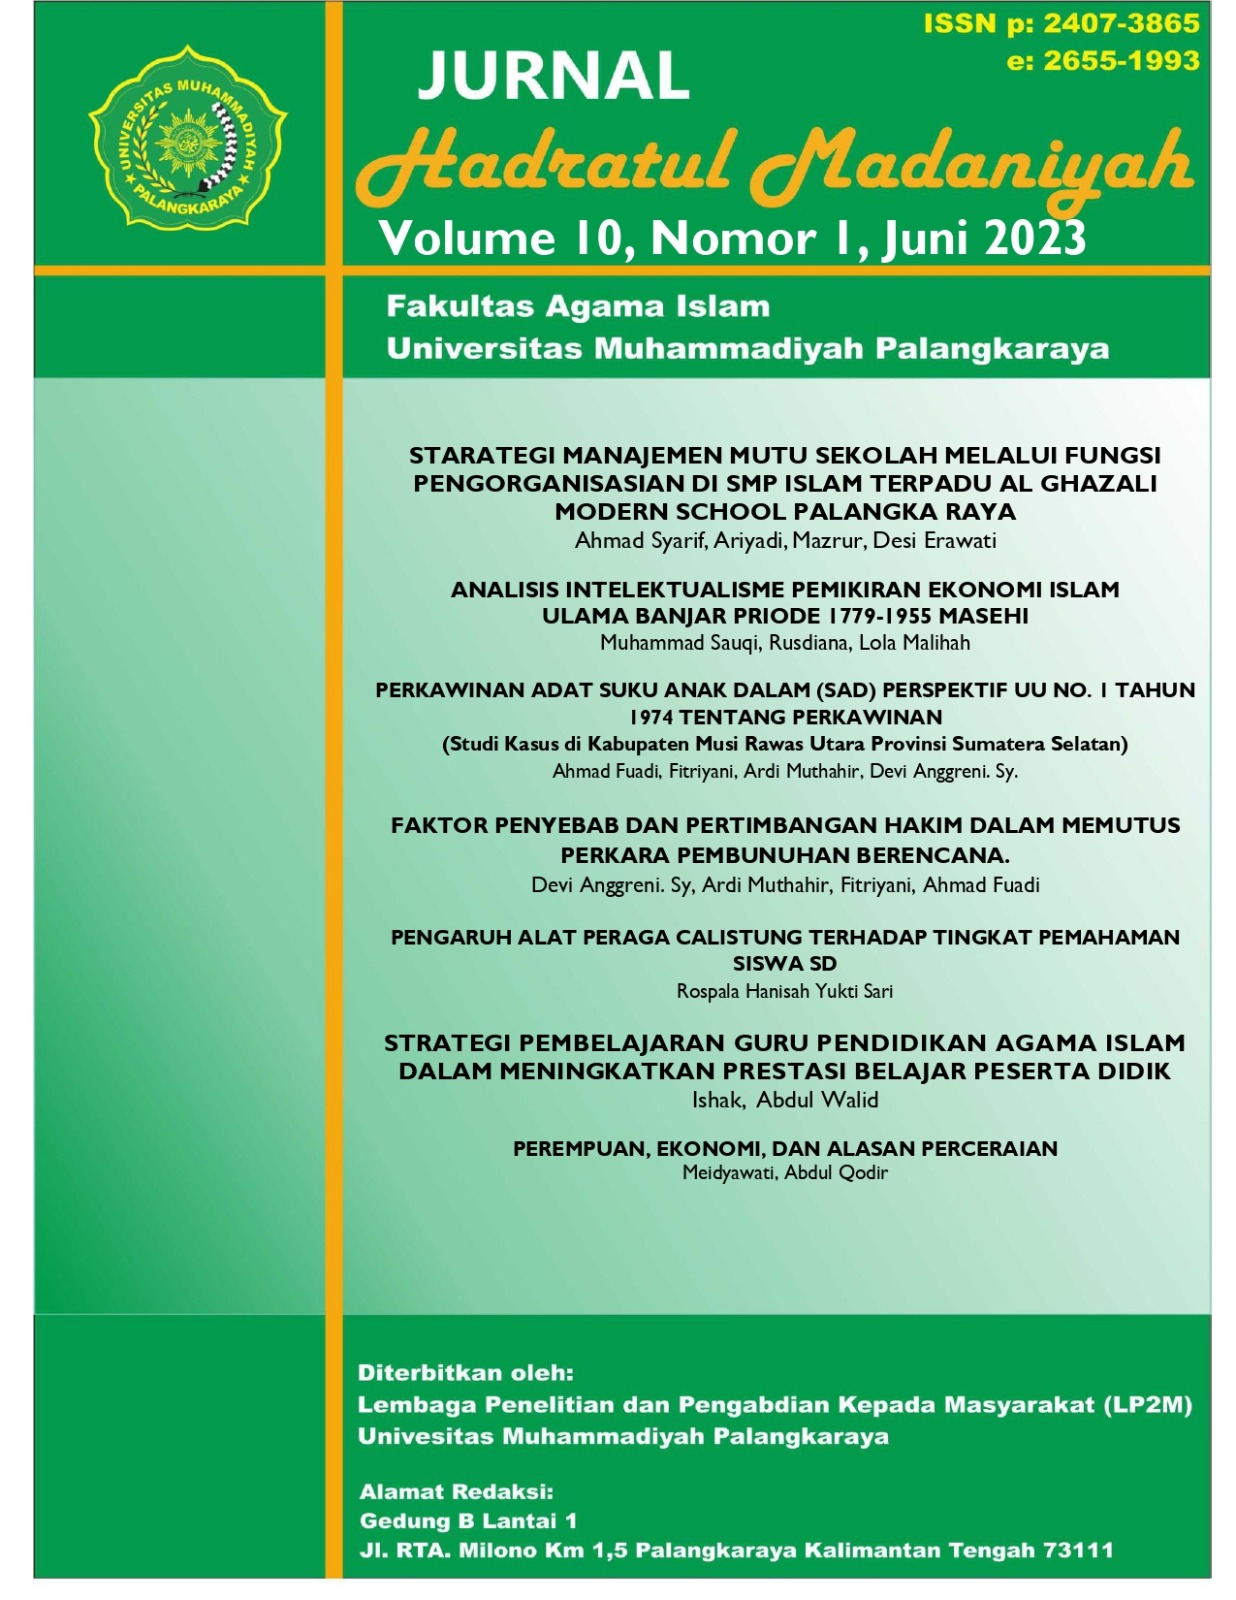 The publication of Jurnal Hadratul Madaniyah certainly participates in disseminating the results of research and review of science and technology development conducted by lecturers and researchers especially from UM Palangkaraya and other universities. This edition contains 7 articles consisting of Islamic Studies and Islamic Law topics.